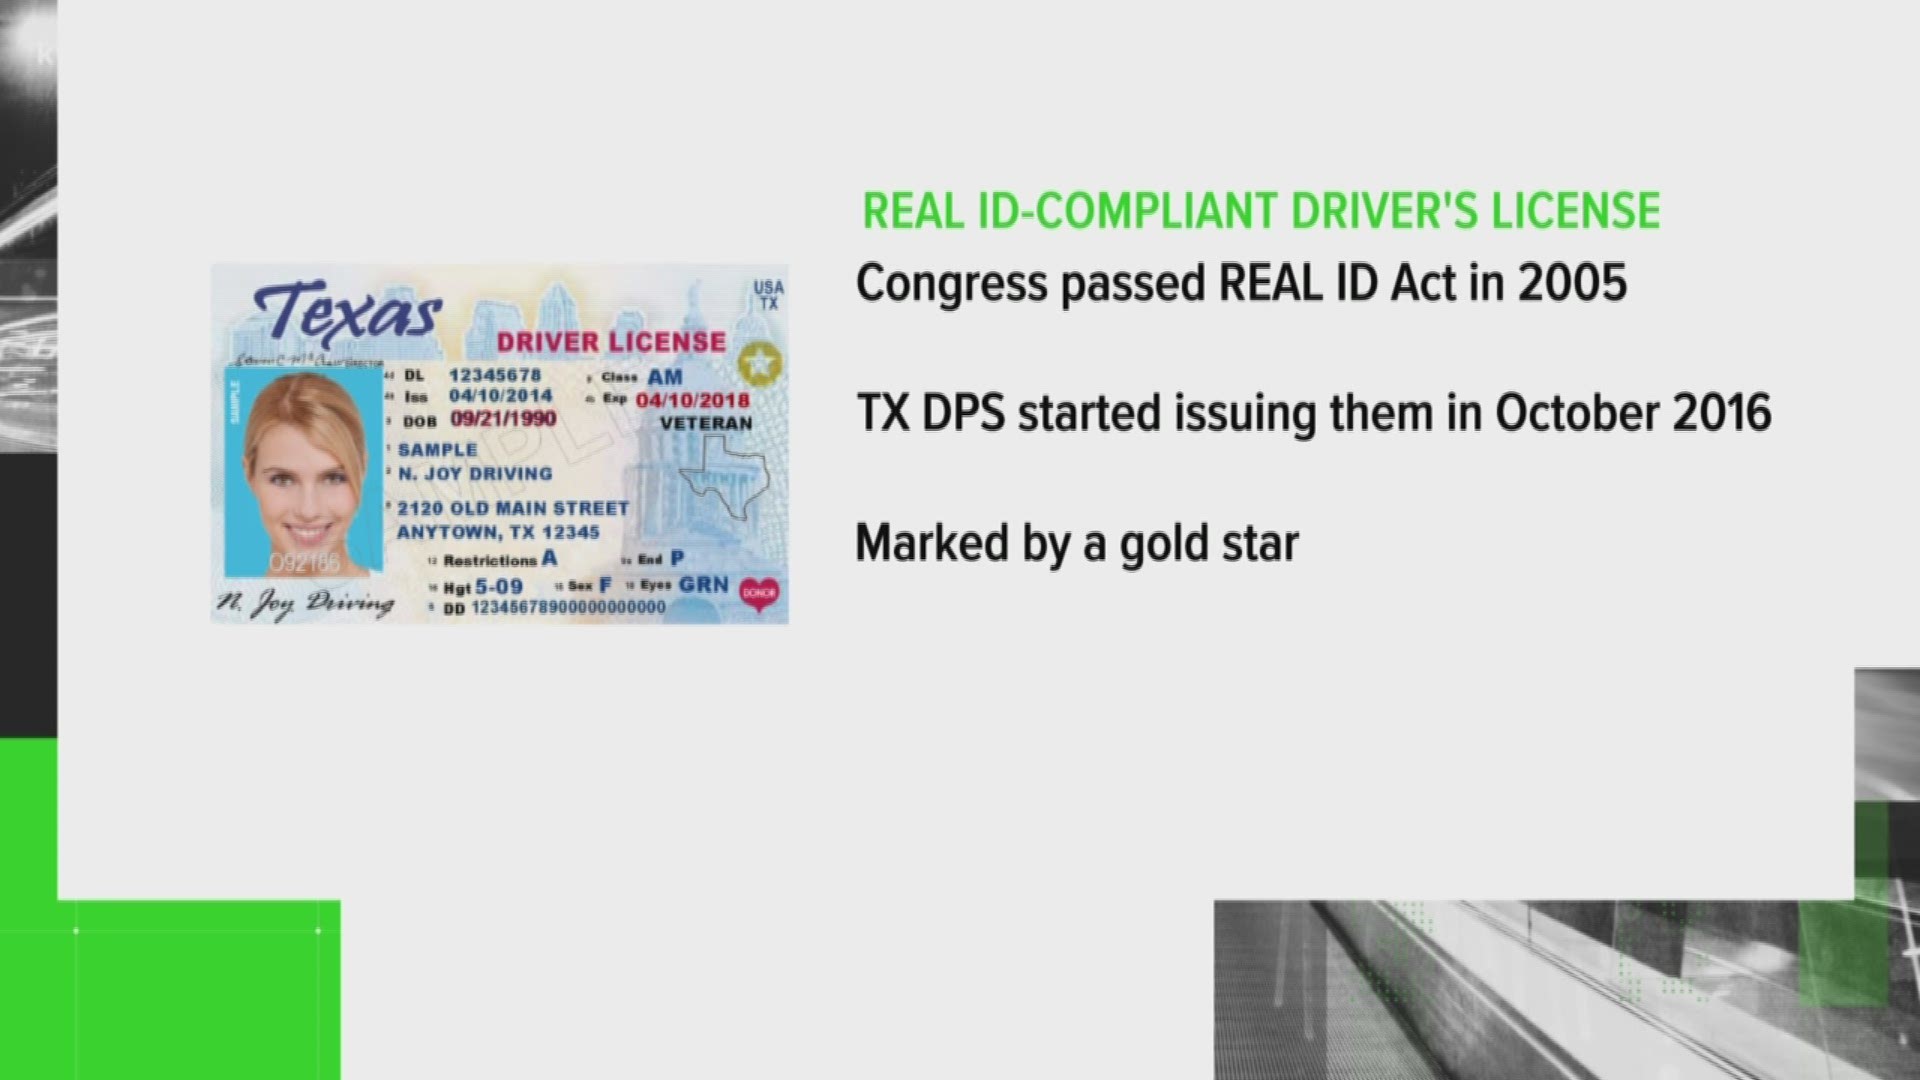 If your driver license doesn't have a gold star on it, you won't be able to use it to get through TSA at the airport.